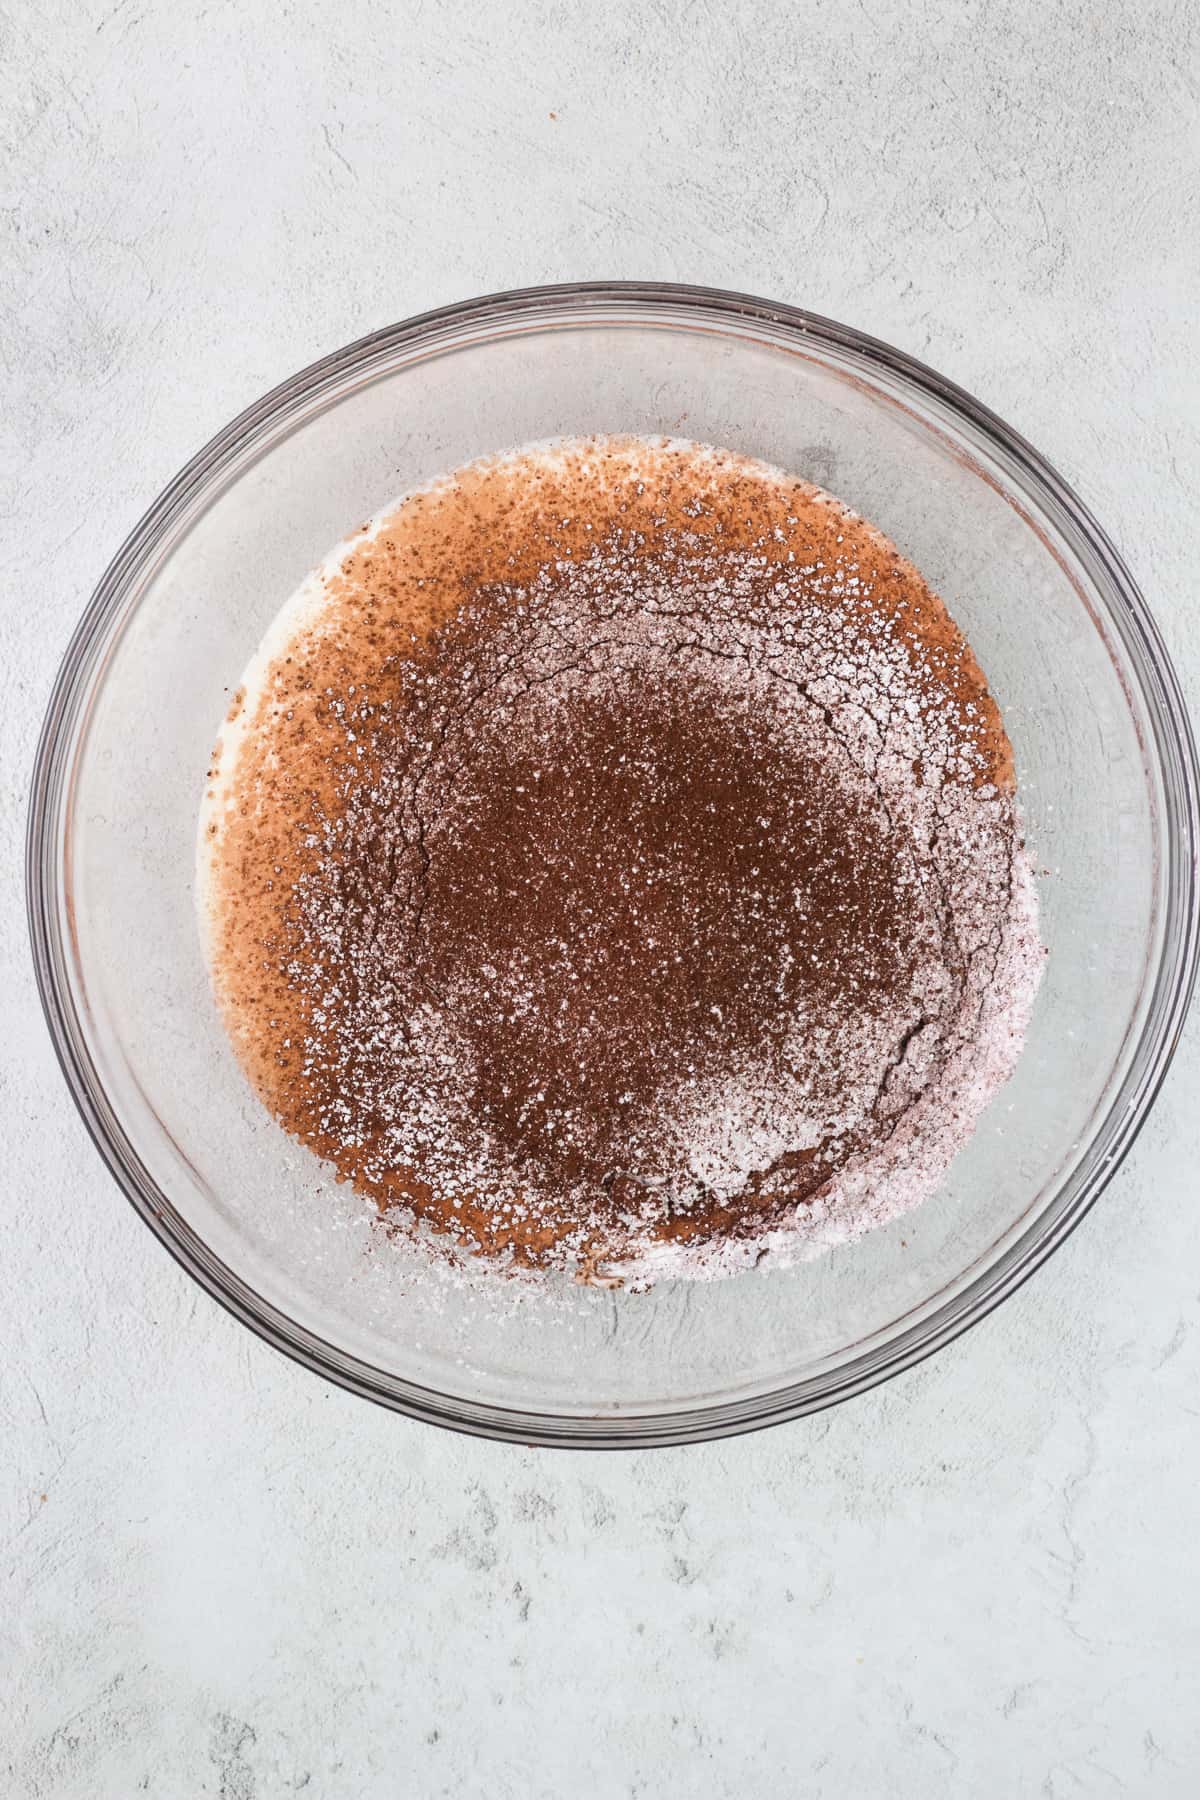 Heavy cream, cocoa powder and powdered sugar in a large glass bowl